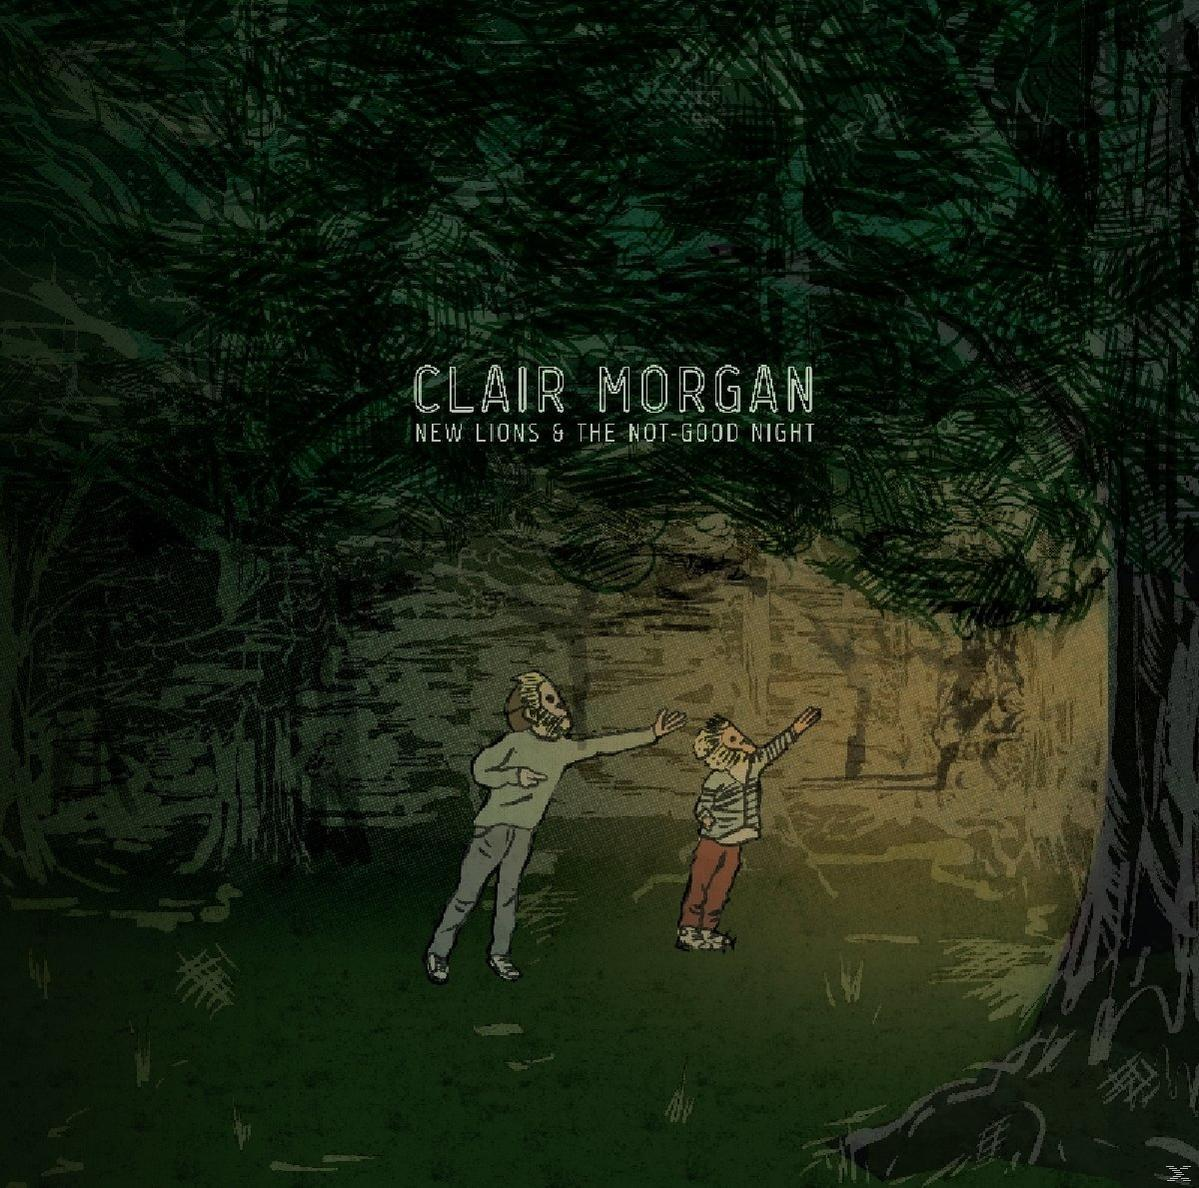 Clair Morgan (CD) - - Lions New Night The And Not-Good